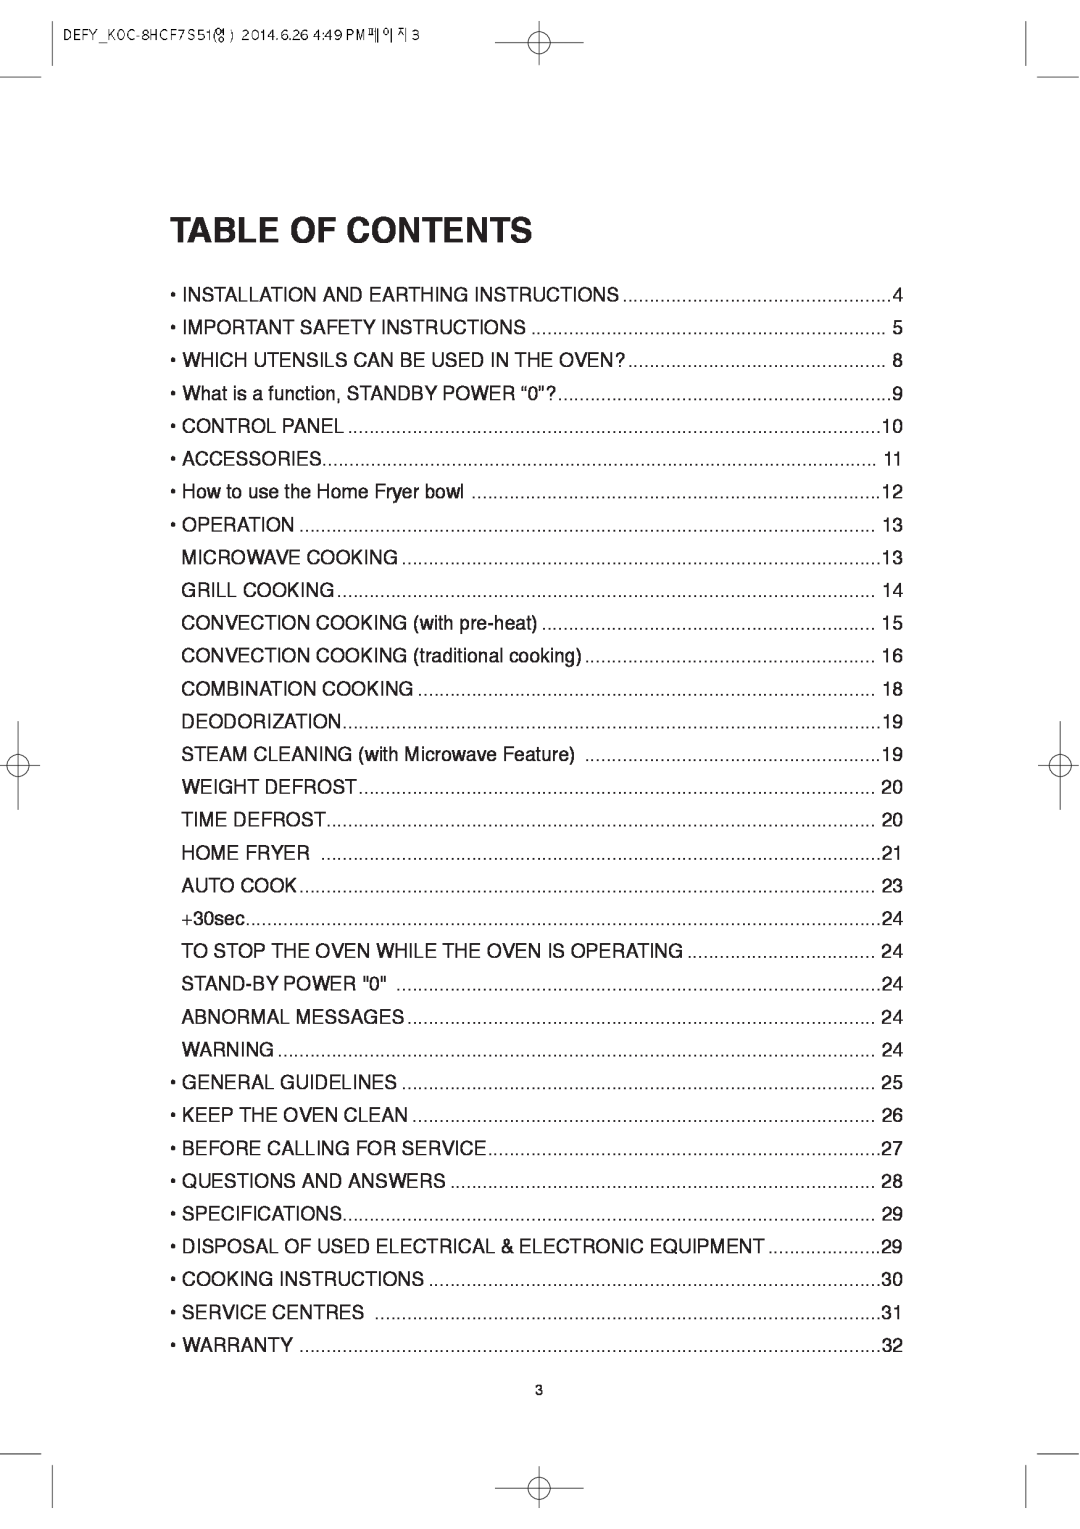 Defy Appliances MWA 2434 MM user manual Table Of Contents 